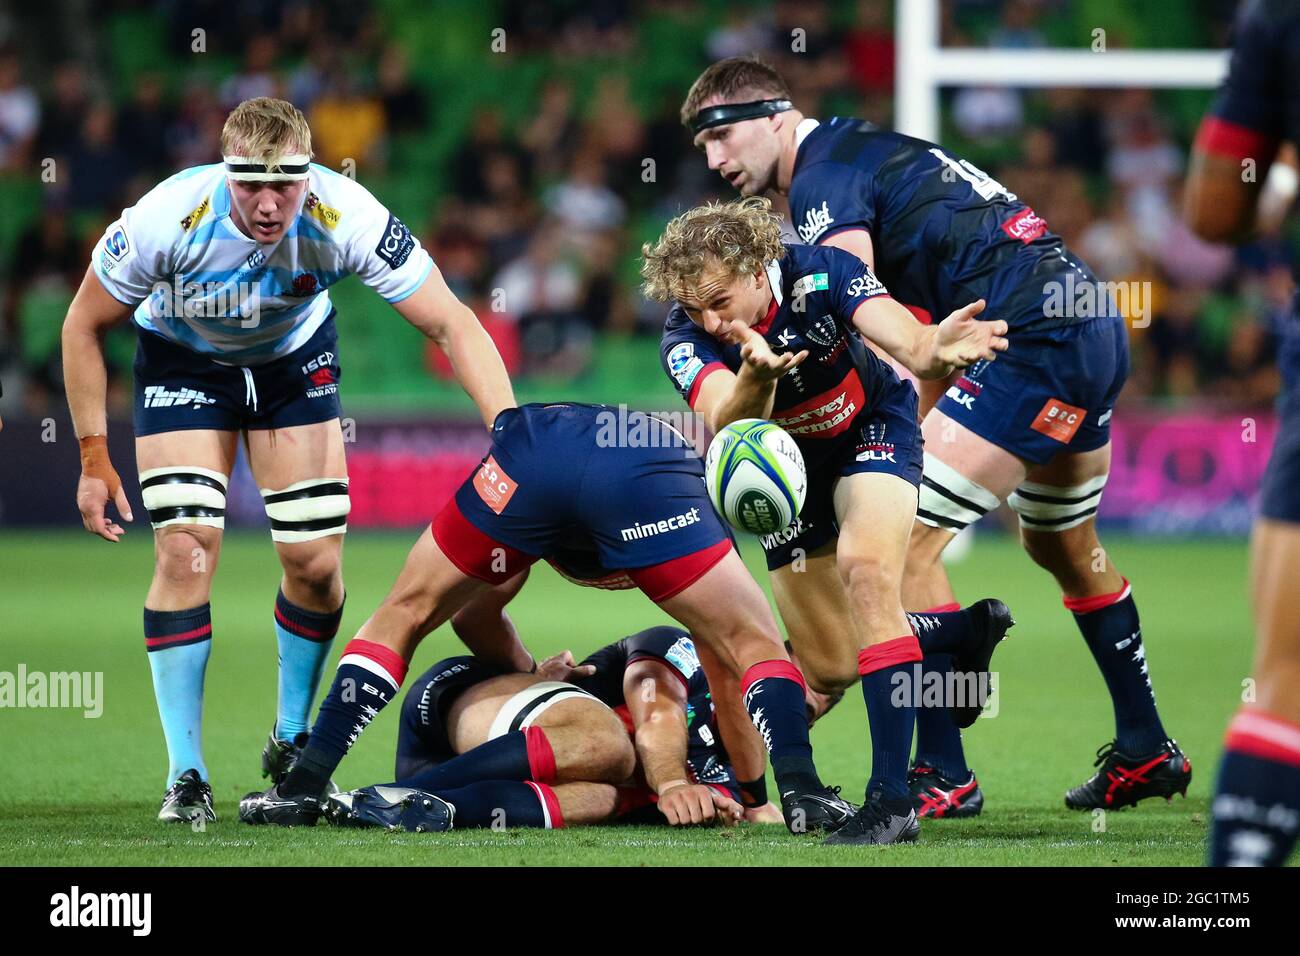 MELBOURNE, AUSTRALIA - MARCH 19: Joe Powell of the Melbourne Rebels passes the ball during the round 5 Super Rugby match between the Melbourne Rebels and NSW Waratahs at AAMI Park on March 19, 2021 in Melbourne, Australia.  Credit: Dave Hewison/Speed Media/Alamy Live News Stock Photo